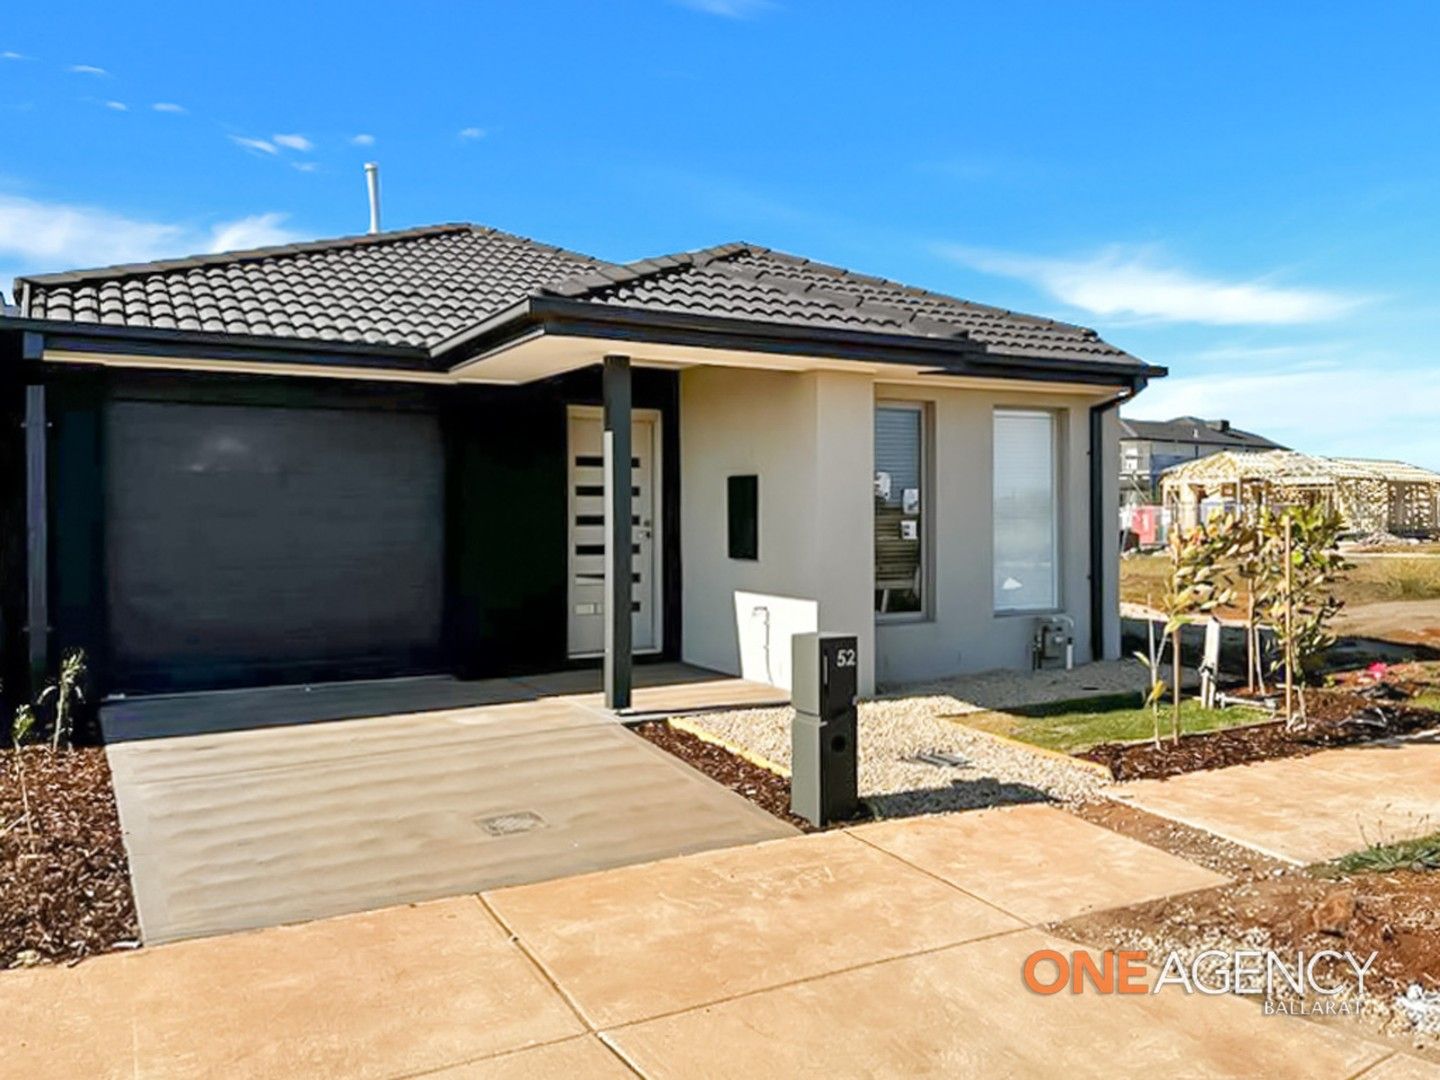 3 bedrooms House in 52 Plymouth Drive THORNHILL PARK VIC, 3335